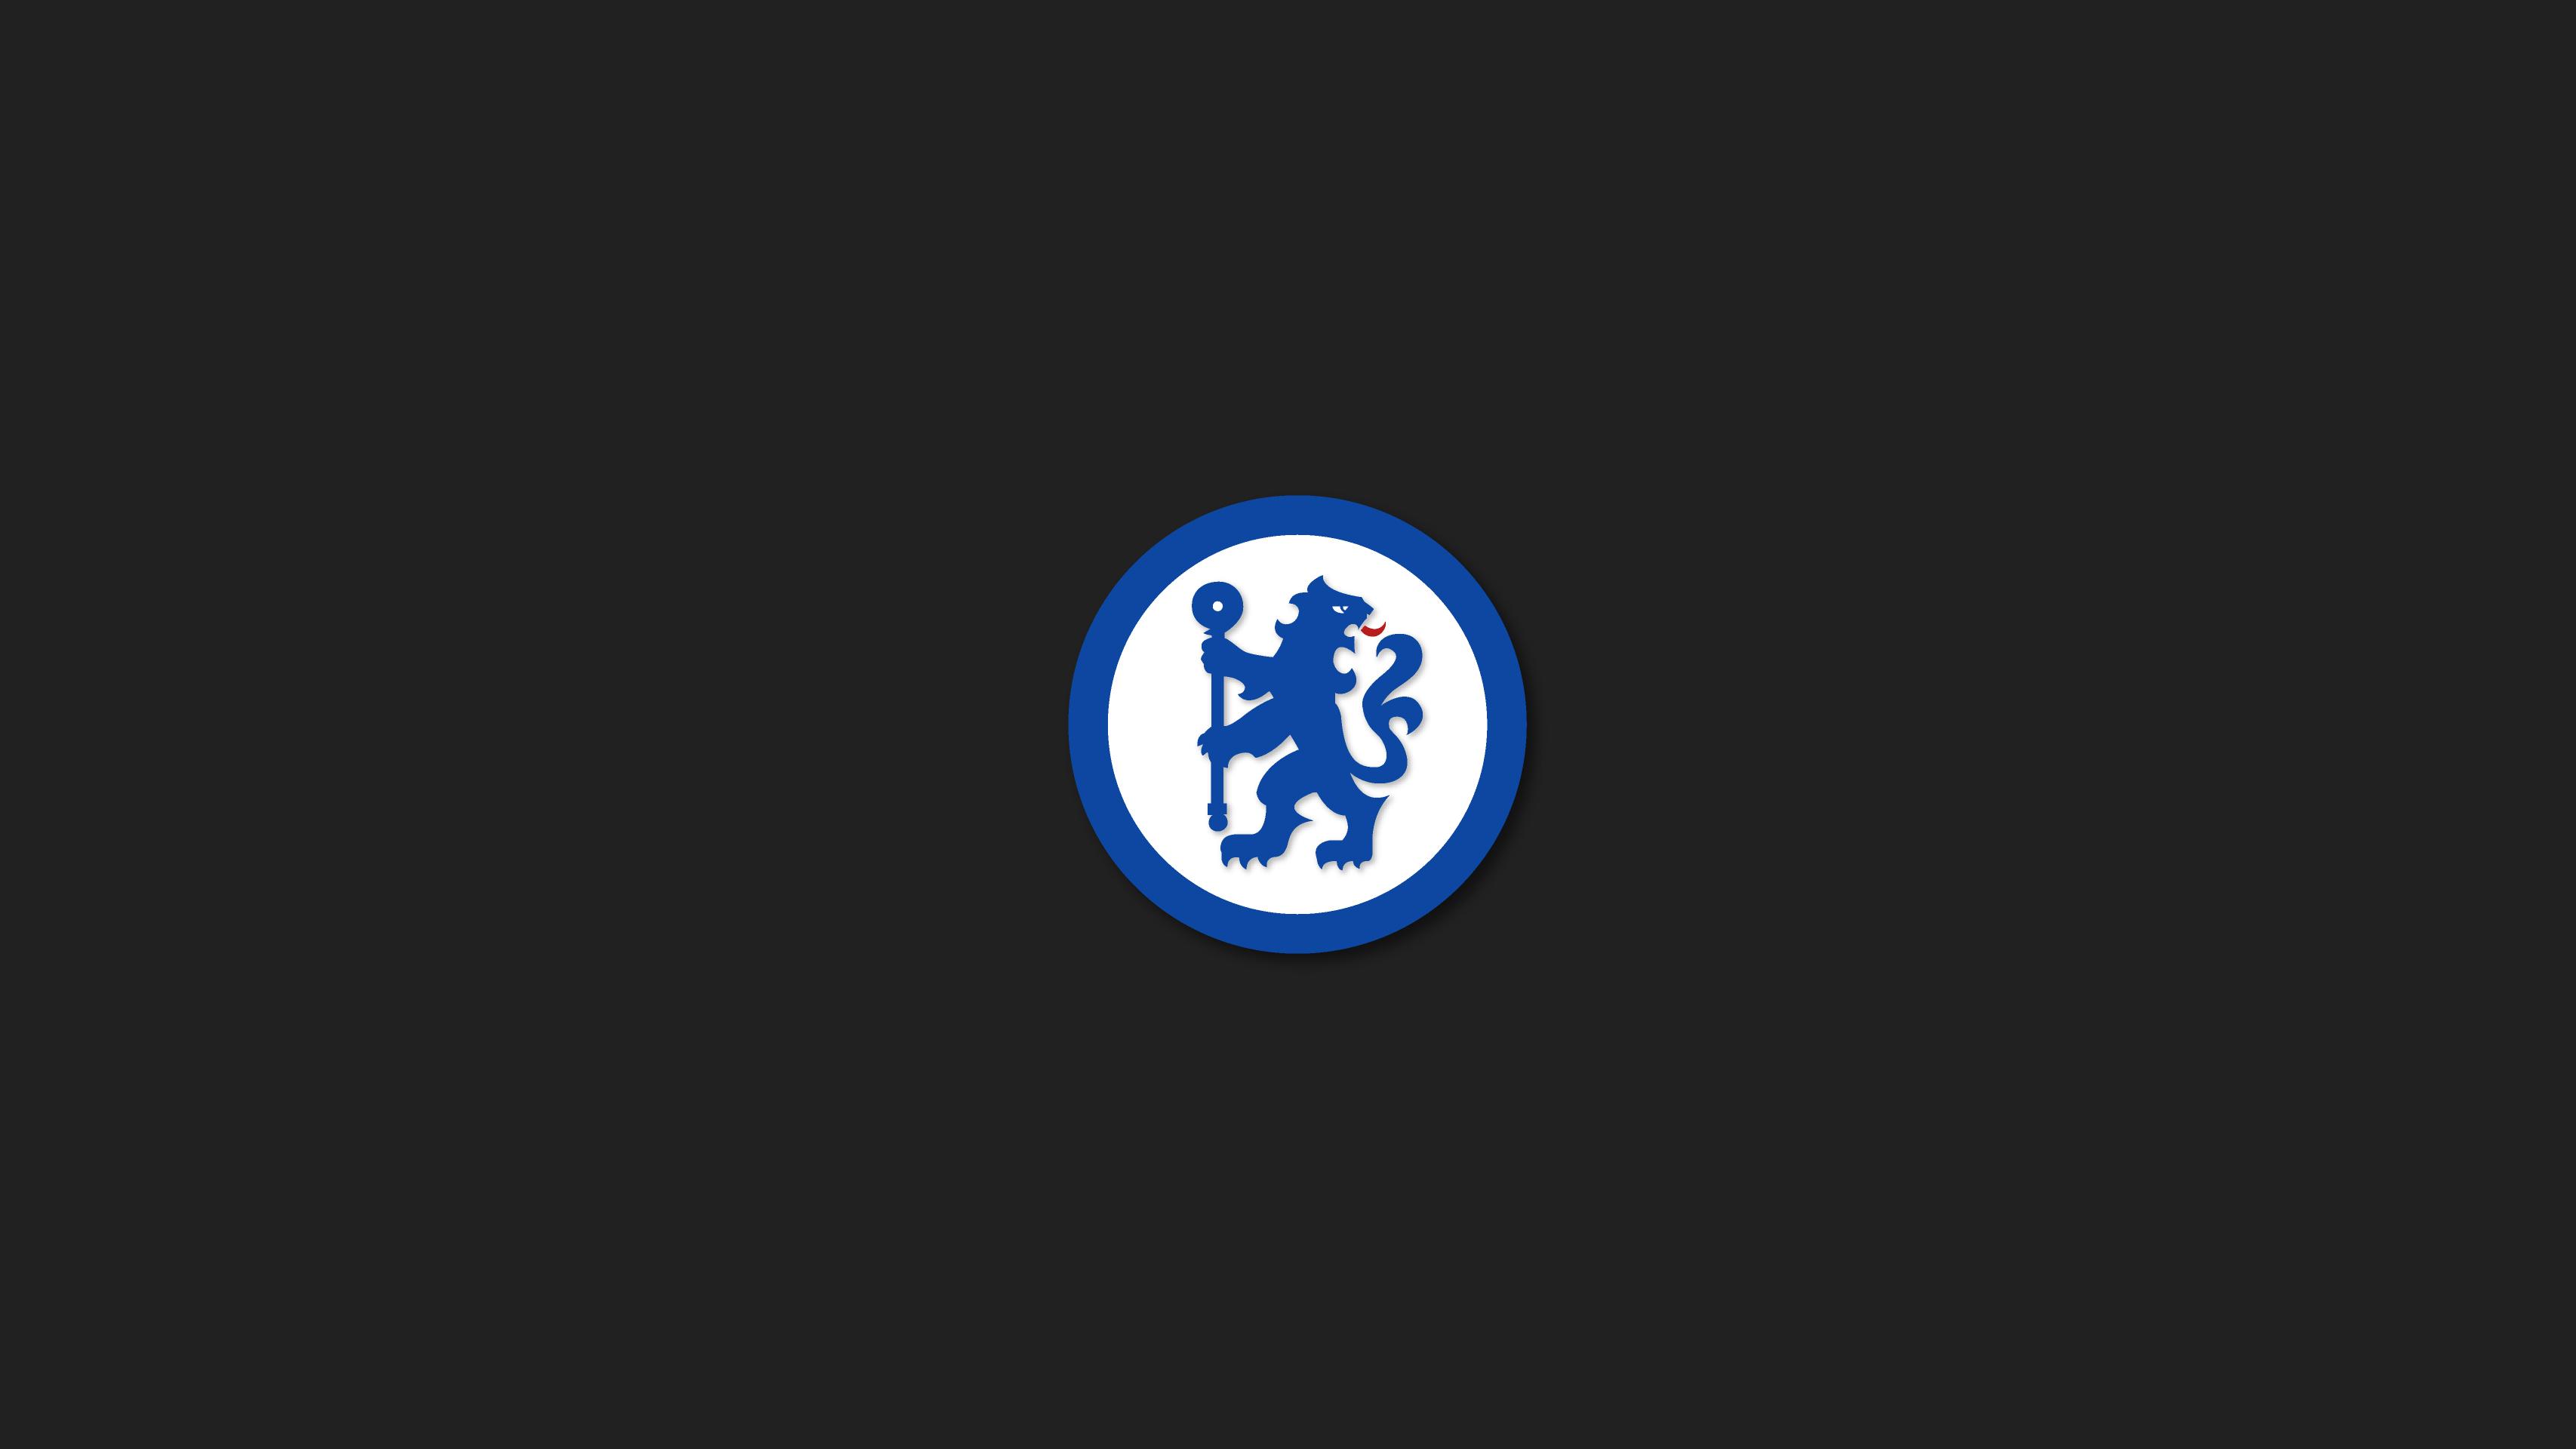 I made these minimal Chelsea wallpaper years ago, thought some